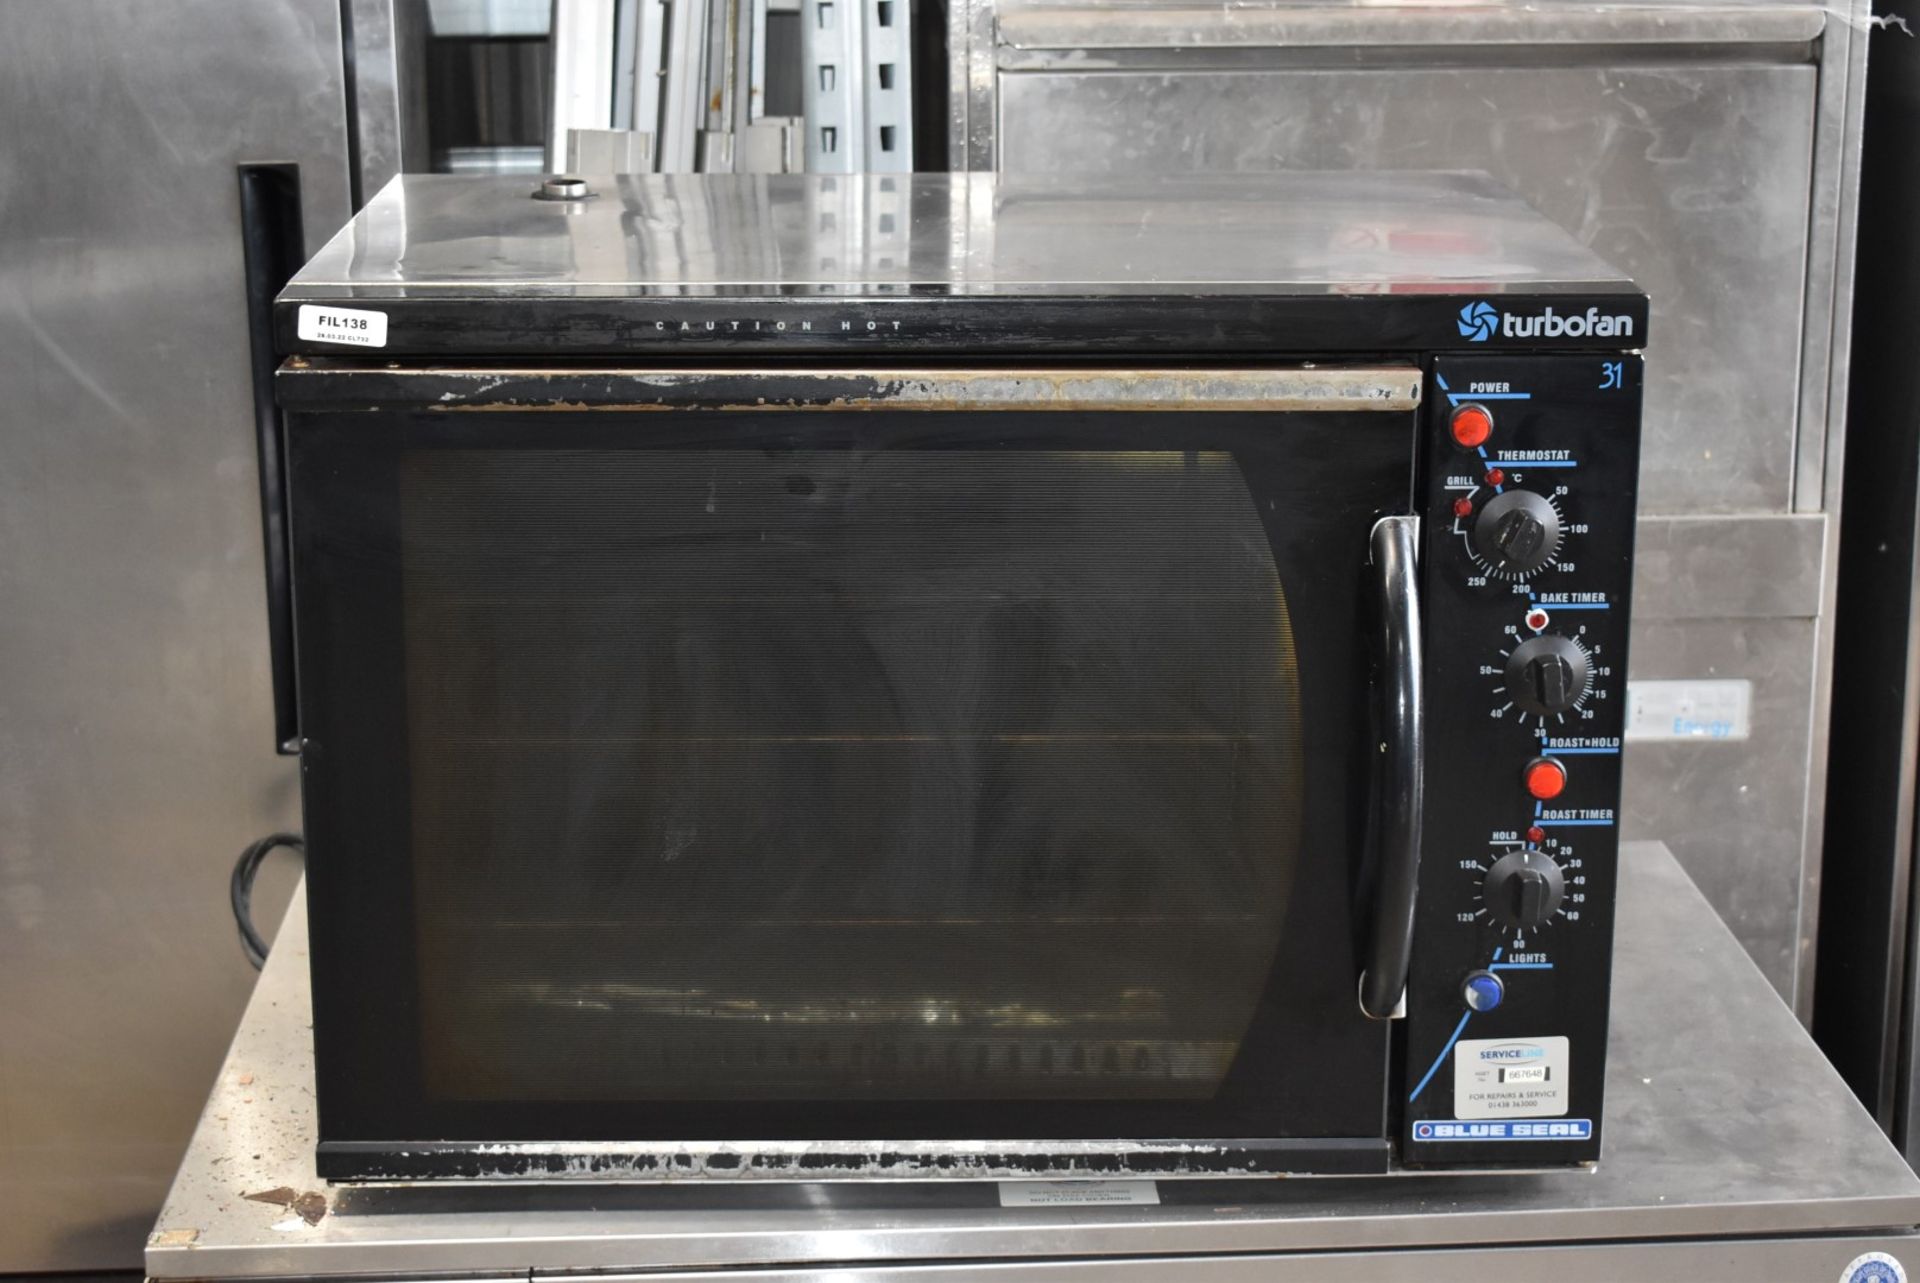 1 x Blue Seal Turbo Fan 31 240v Convection Oven - Dimensions: H60 x W80 x D70 cms - CL740 - Ref: - Image 9 of 9